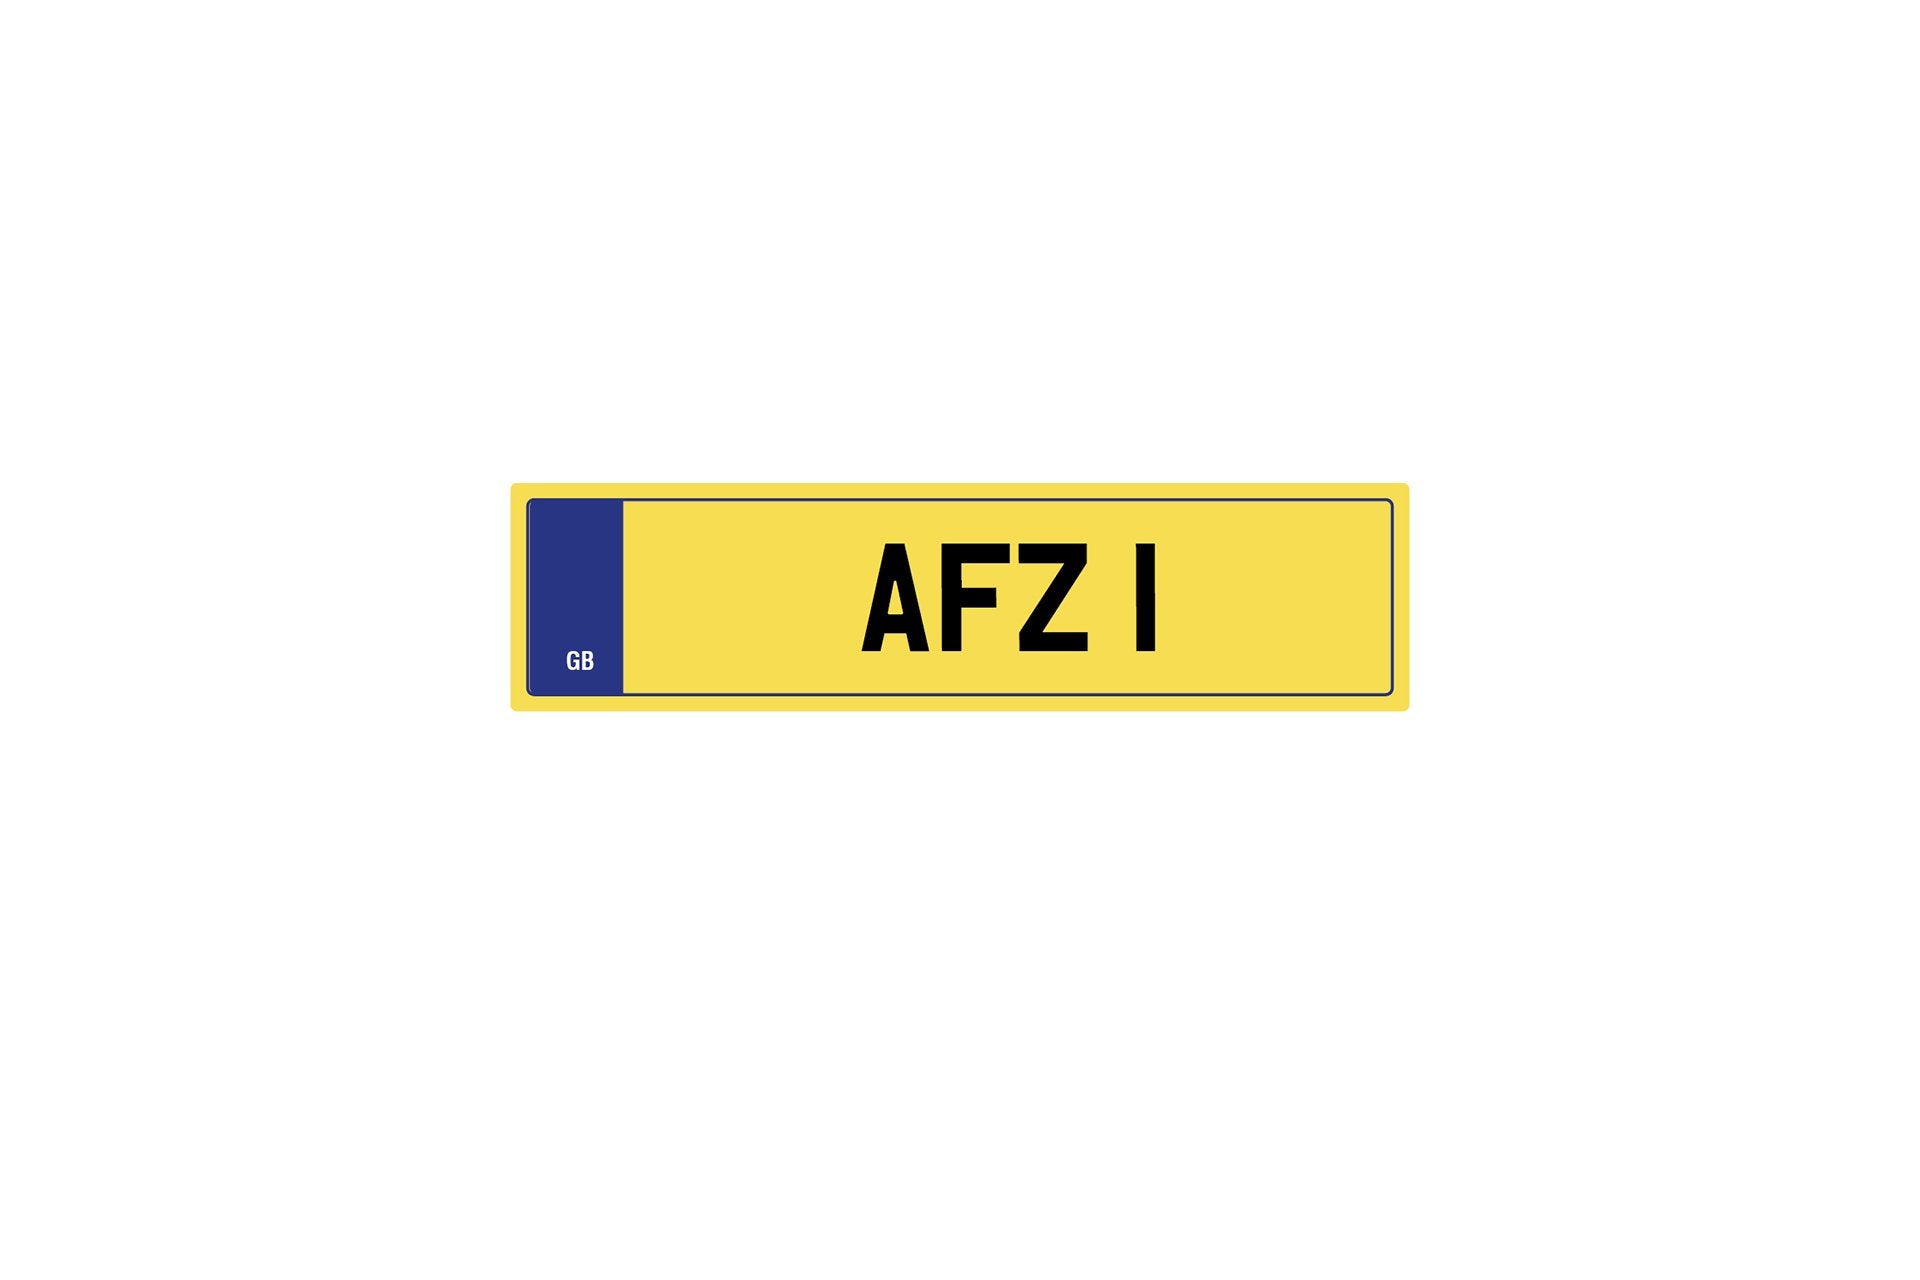 Private Plate Afz 1 by Kahn - Image 265